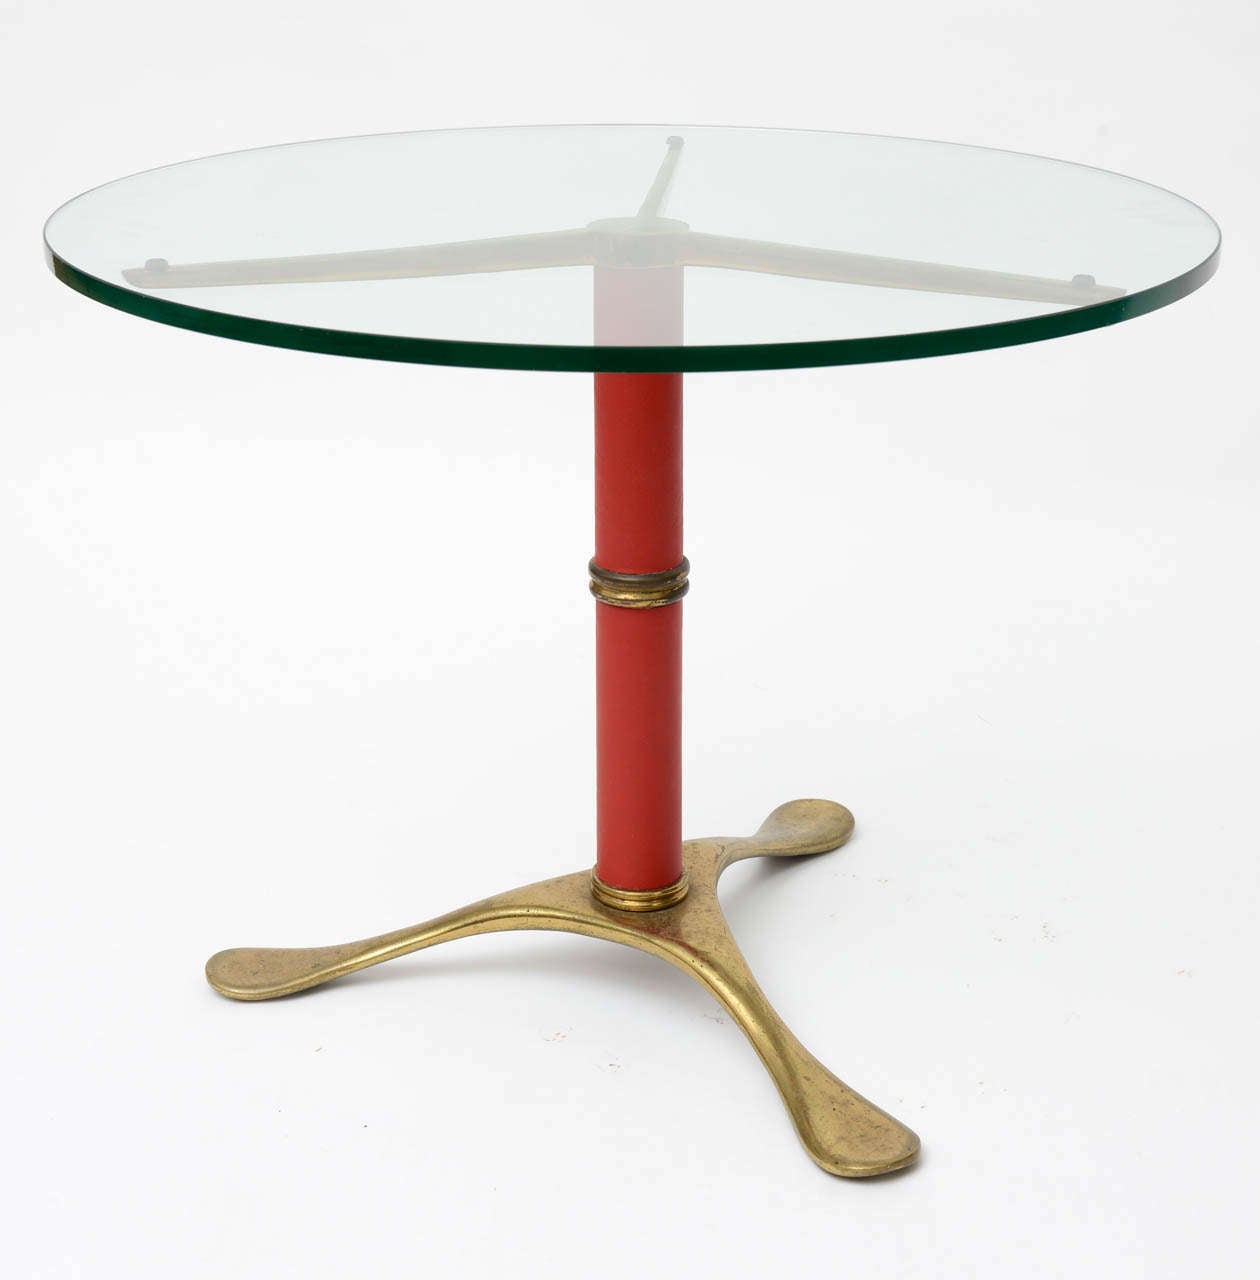 Brass table from Italy by Paolo Buffa. Brass has nice patina, centre column is wrapped in red leather.